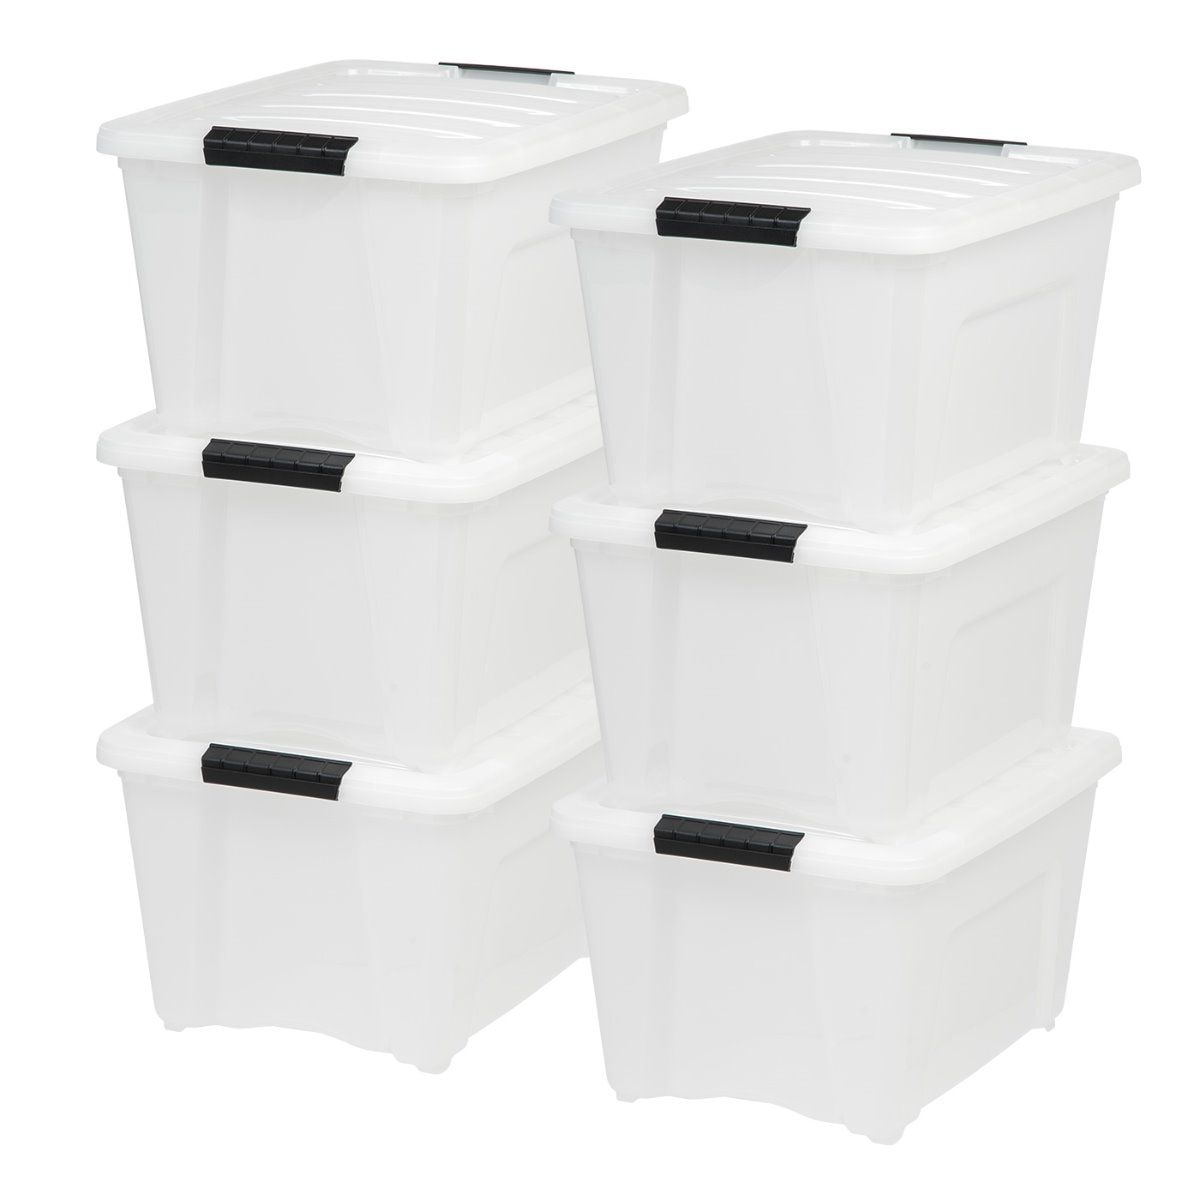 Iris USA, 32 Quart Stack & Pull Clear Plastic Storage Box with Buckles, Gray